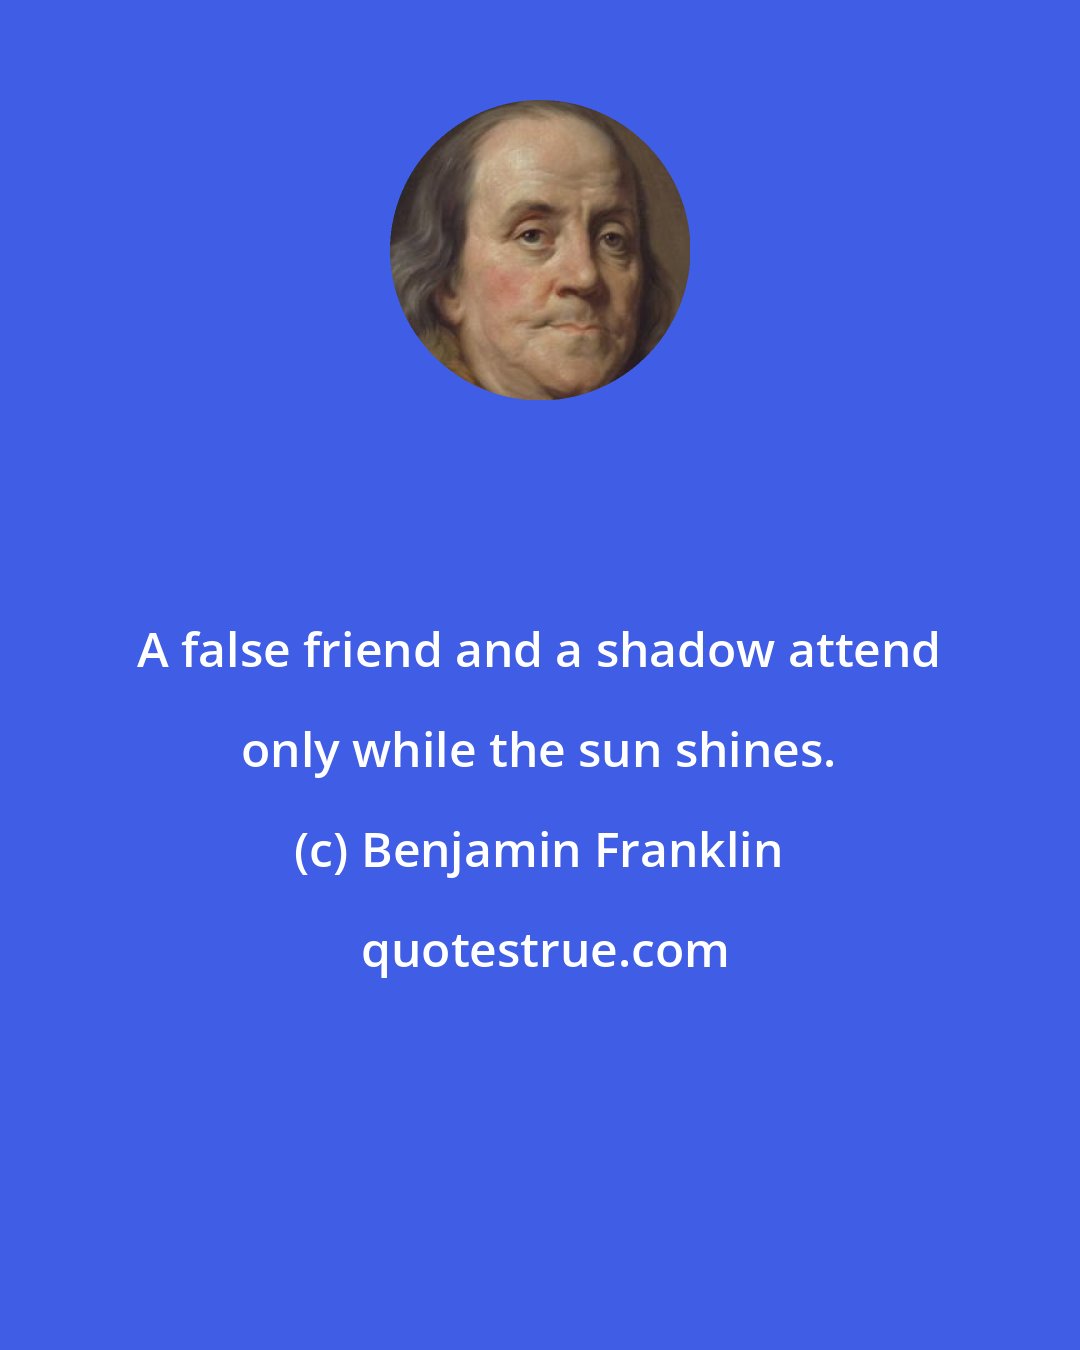 Benjamin Franklin: A false friend and a shadow attend only while the sun shines.